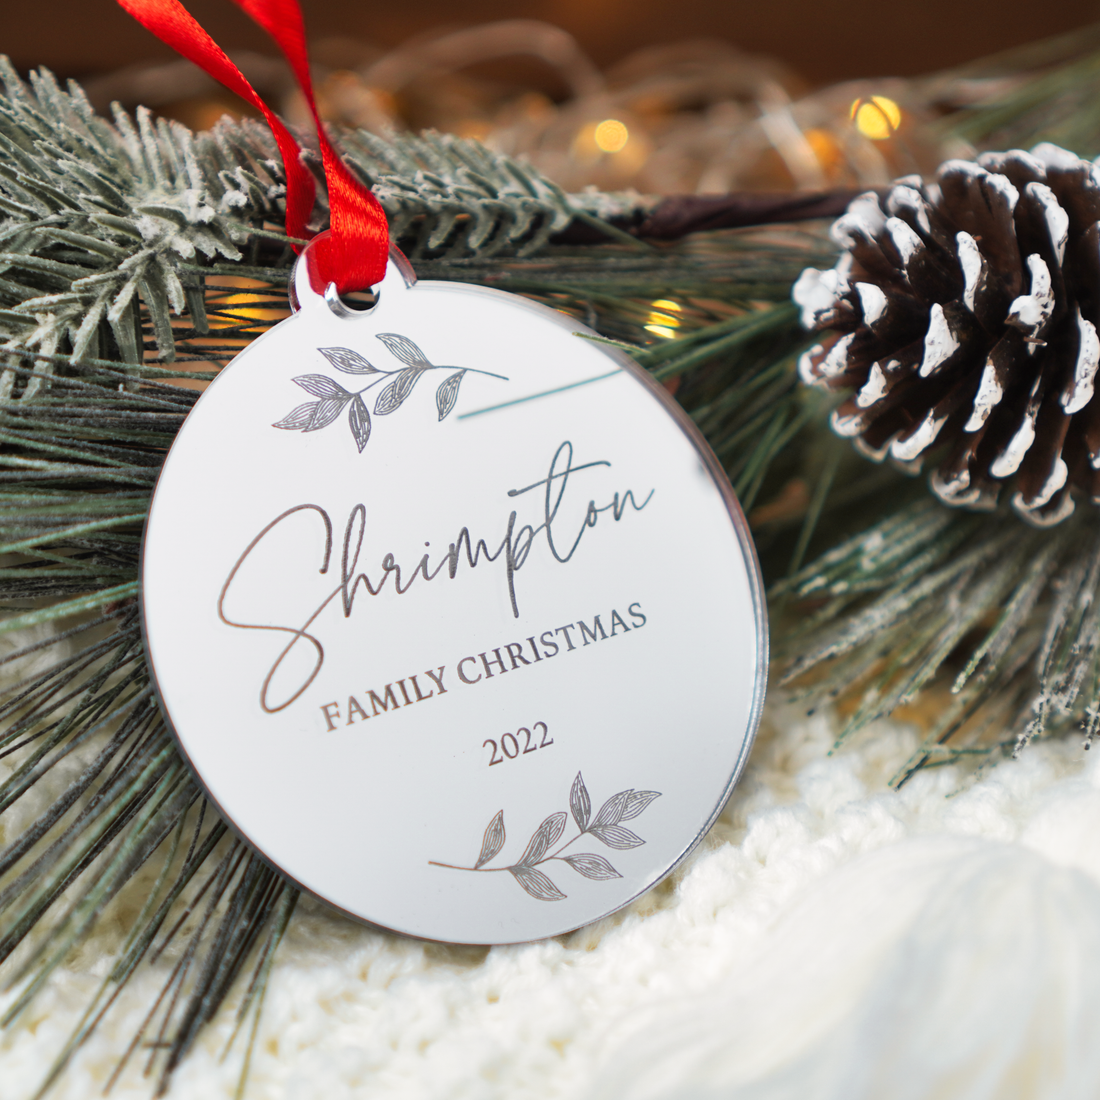 personalised acrylic Christmas ornament gift for family Christmas 